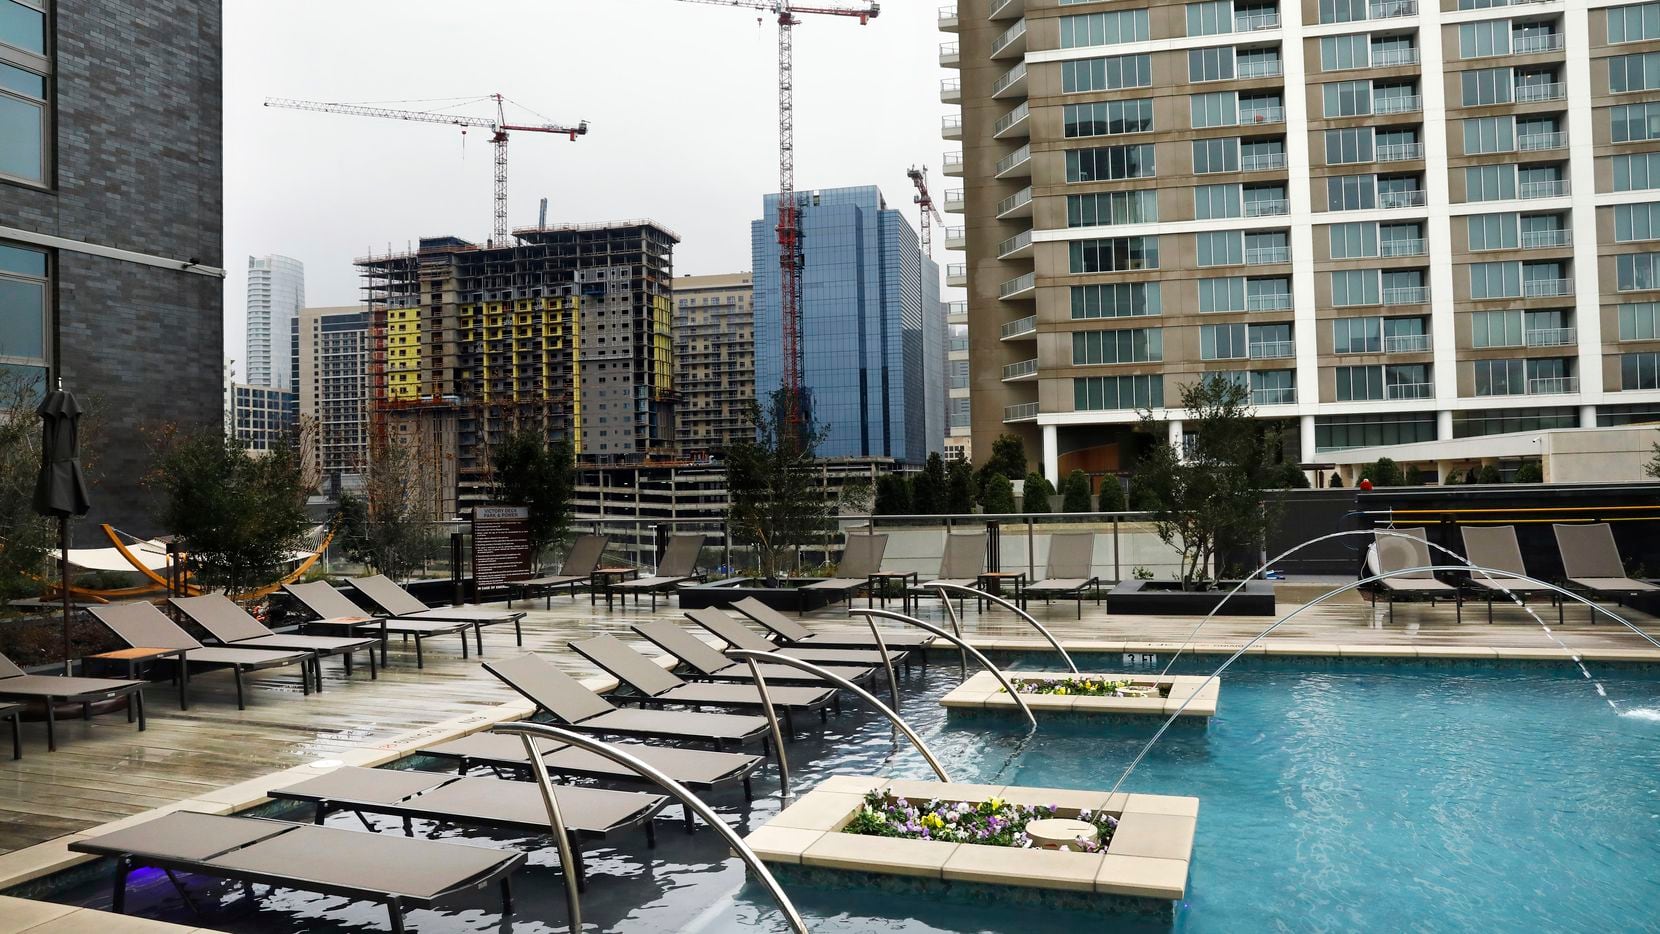 Almost 3,000 new high-rise apartments have opened in the Dallas area and another 4,500 are...